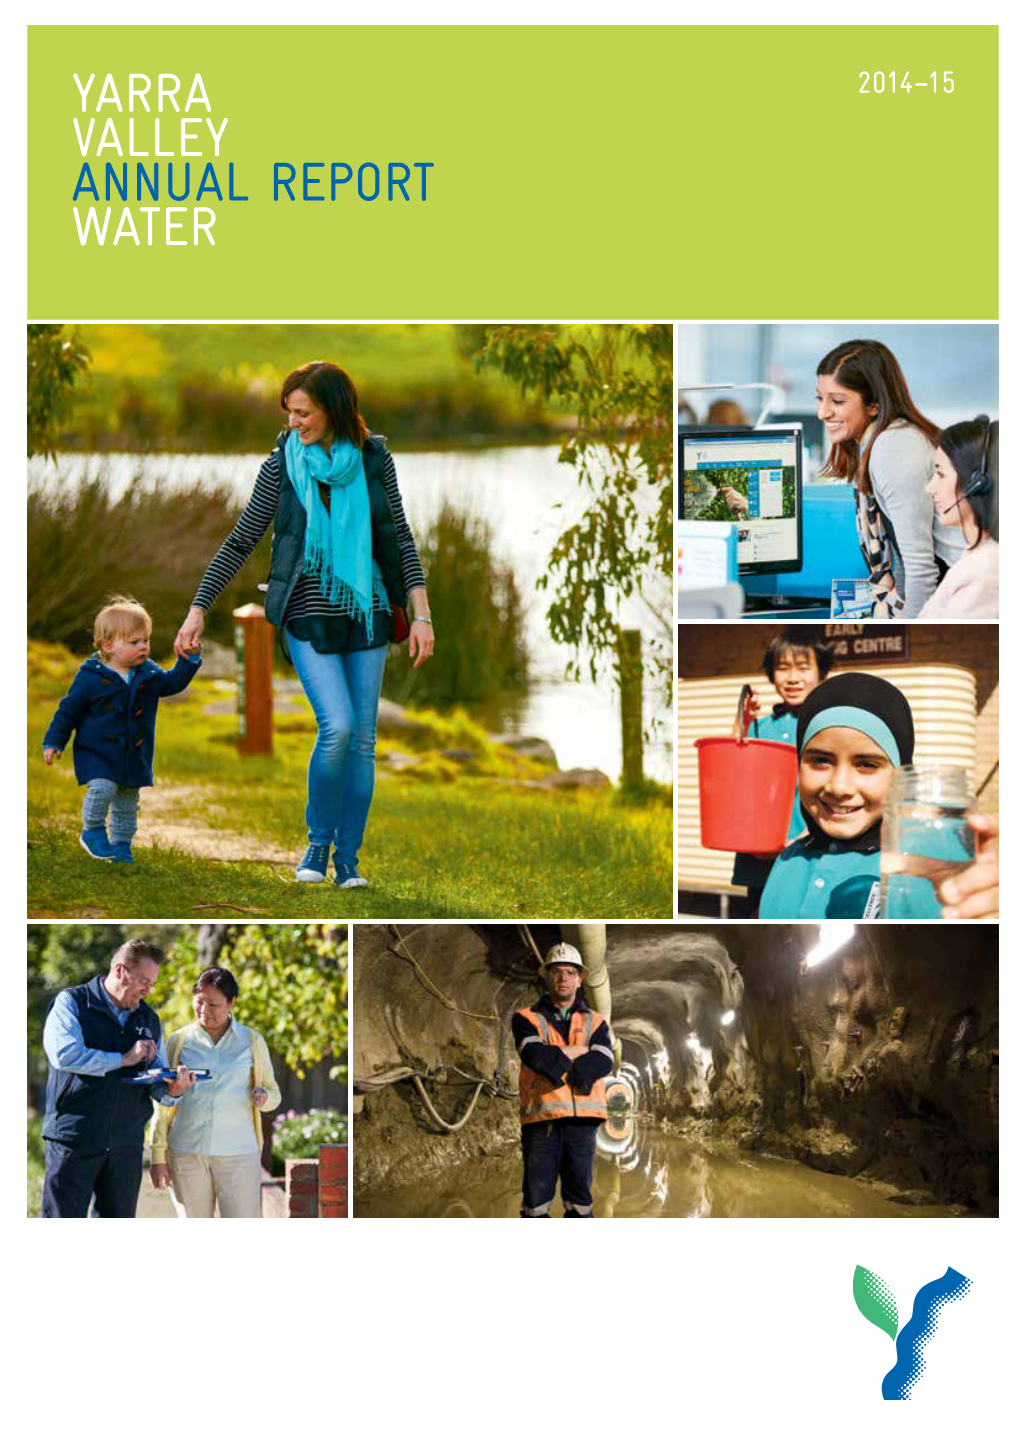 Yarra Valley Annual Report Water